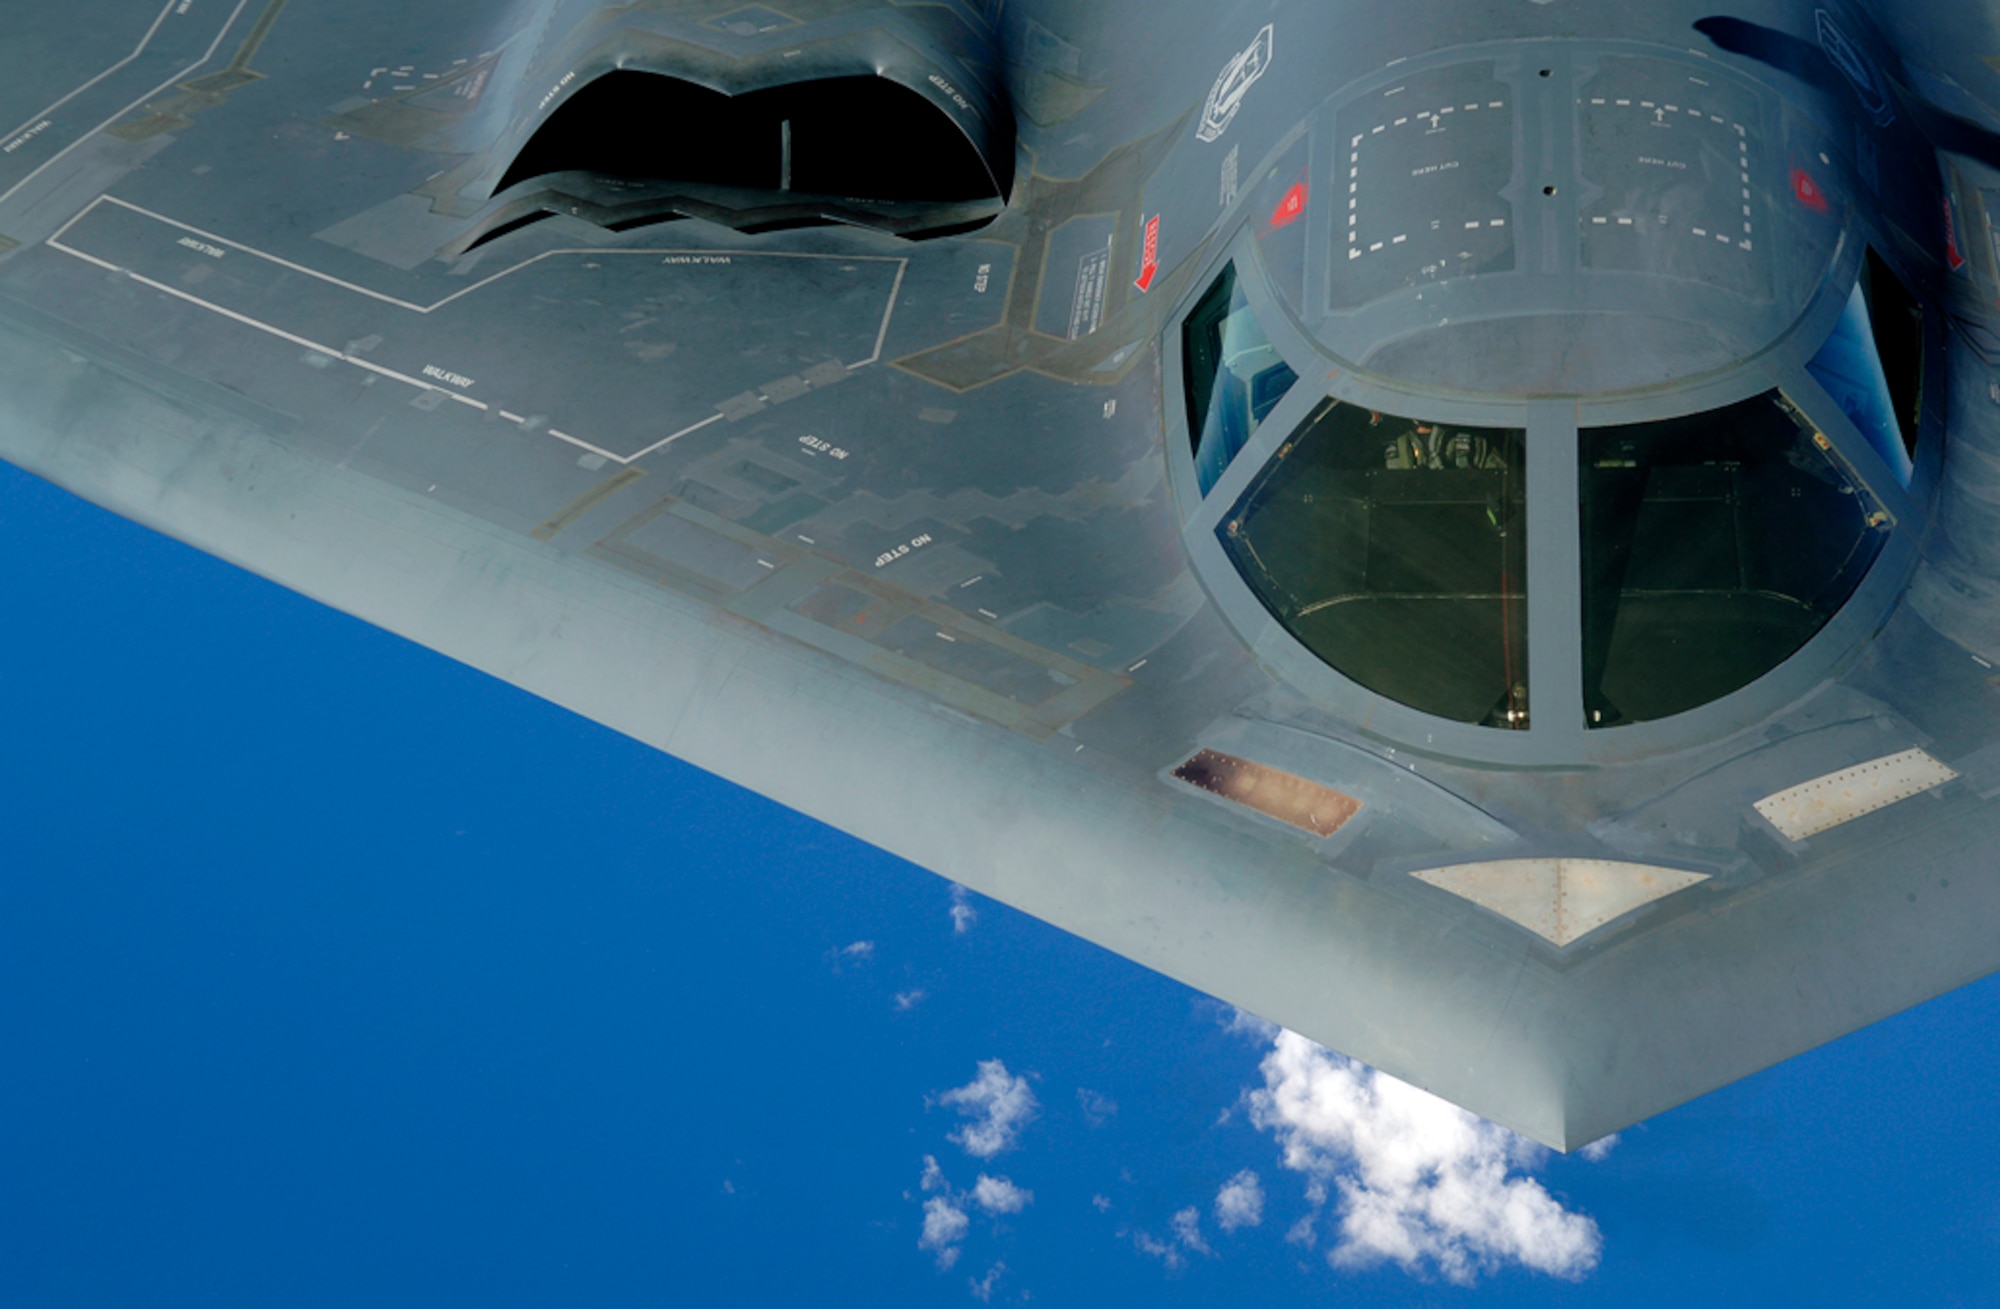 A B-2 Spirit soars after a refueling mission over the Pacific Ocean. The bomber aircraft, from the 509th Bomb Wing at Whiteman AFB, Mo., is part of a continuous bomber presence in the Asia-Pacific region. (U.S. Air Force photo by Staff Sgt. Bennie J. Davis III) 